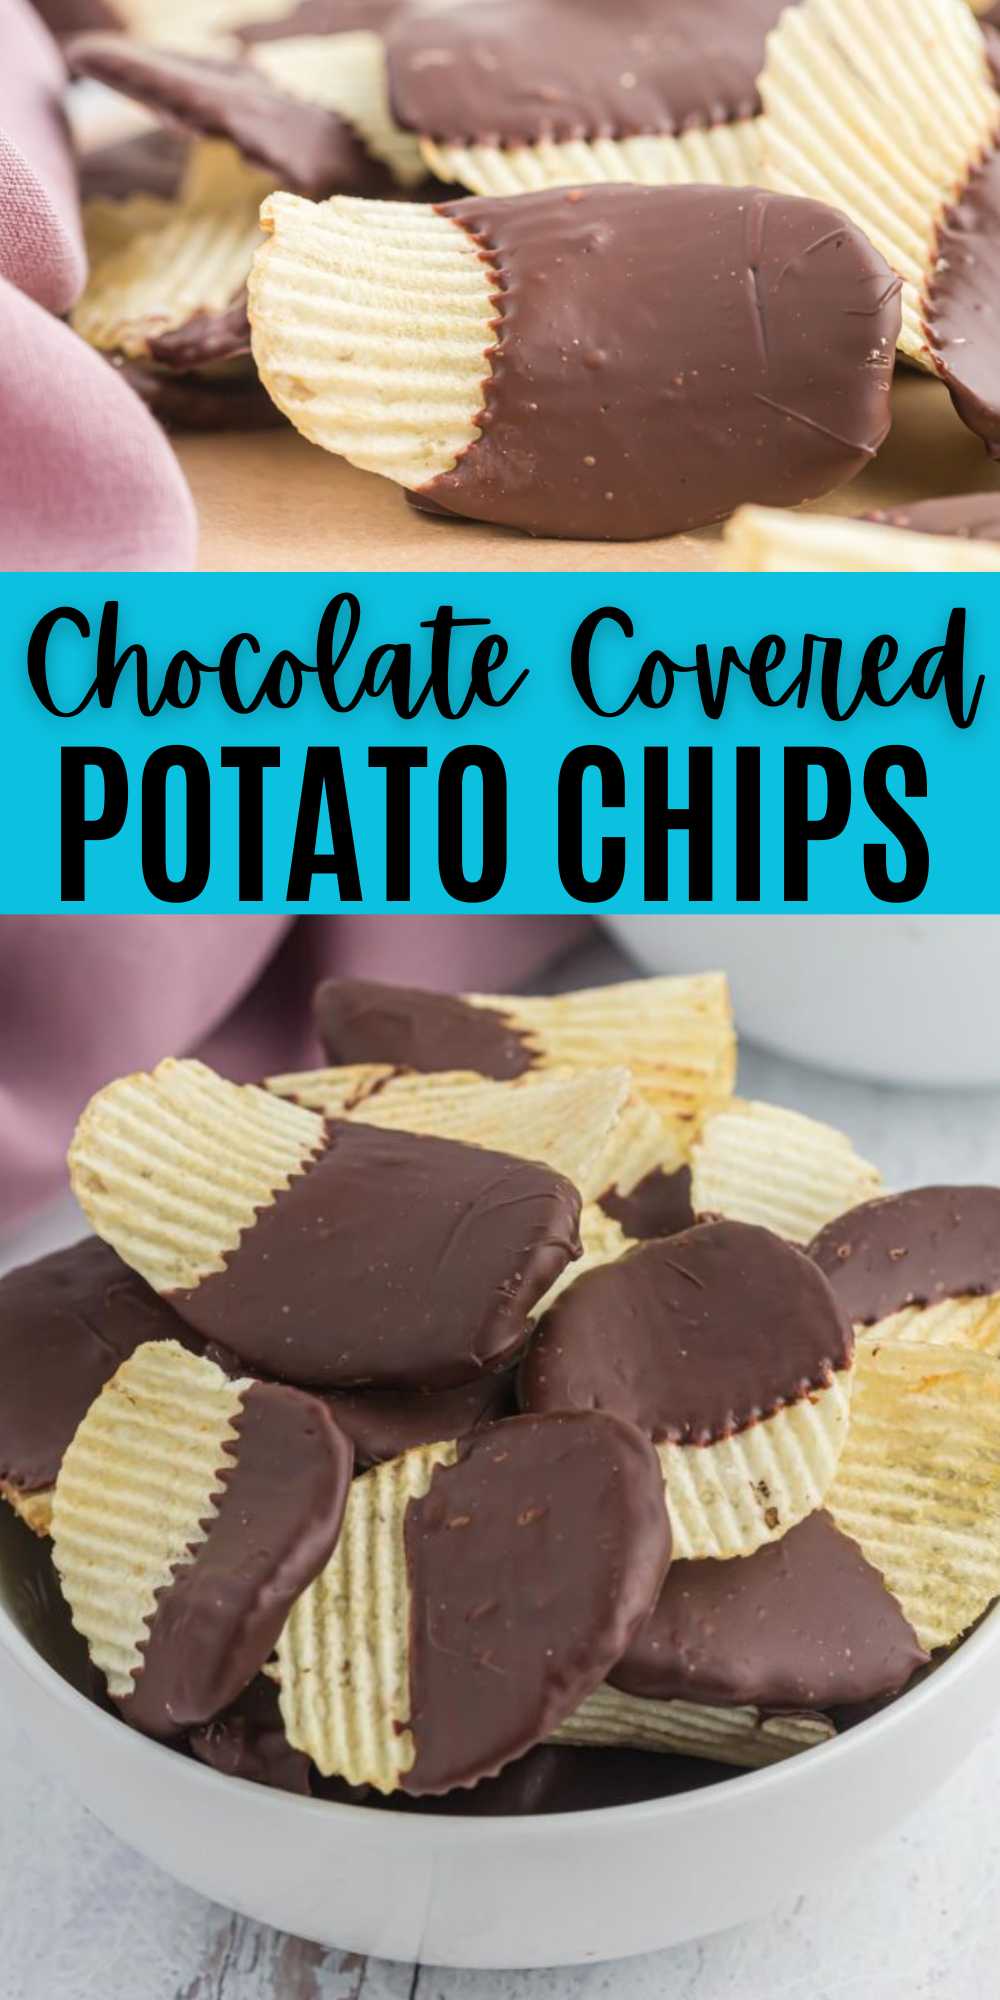 Chocolate Covered Potato Chips is the perfect sweet and salty treat. You only need 2 ingredients to make this delicious snack. Potato chips dipped in chocolate is the ultimate sweet and salty treat. We love the delicious flavor of the combination of chips and chocolate. You only need 2 ingredients to make this addicting snack. #eatingonadime #chocolatecoveredpotatochips #potatochips